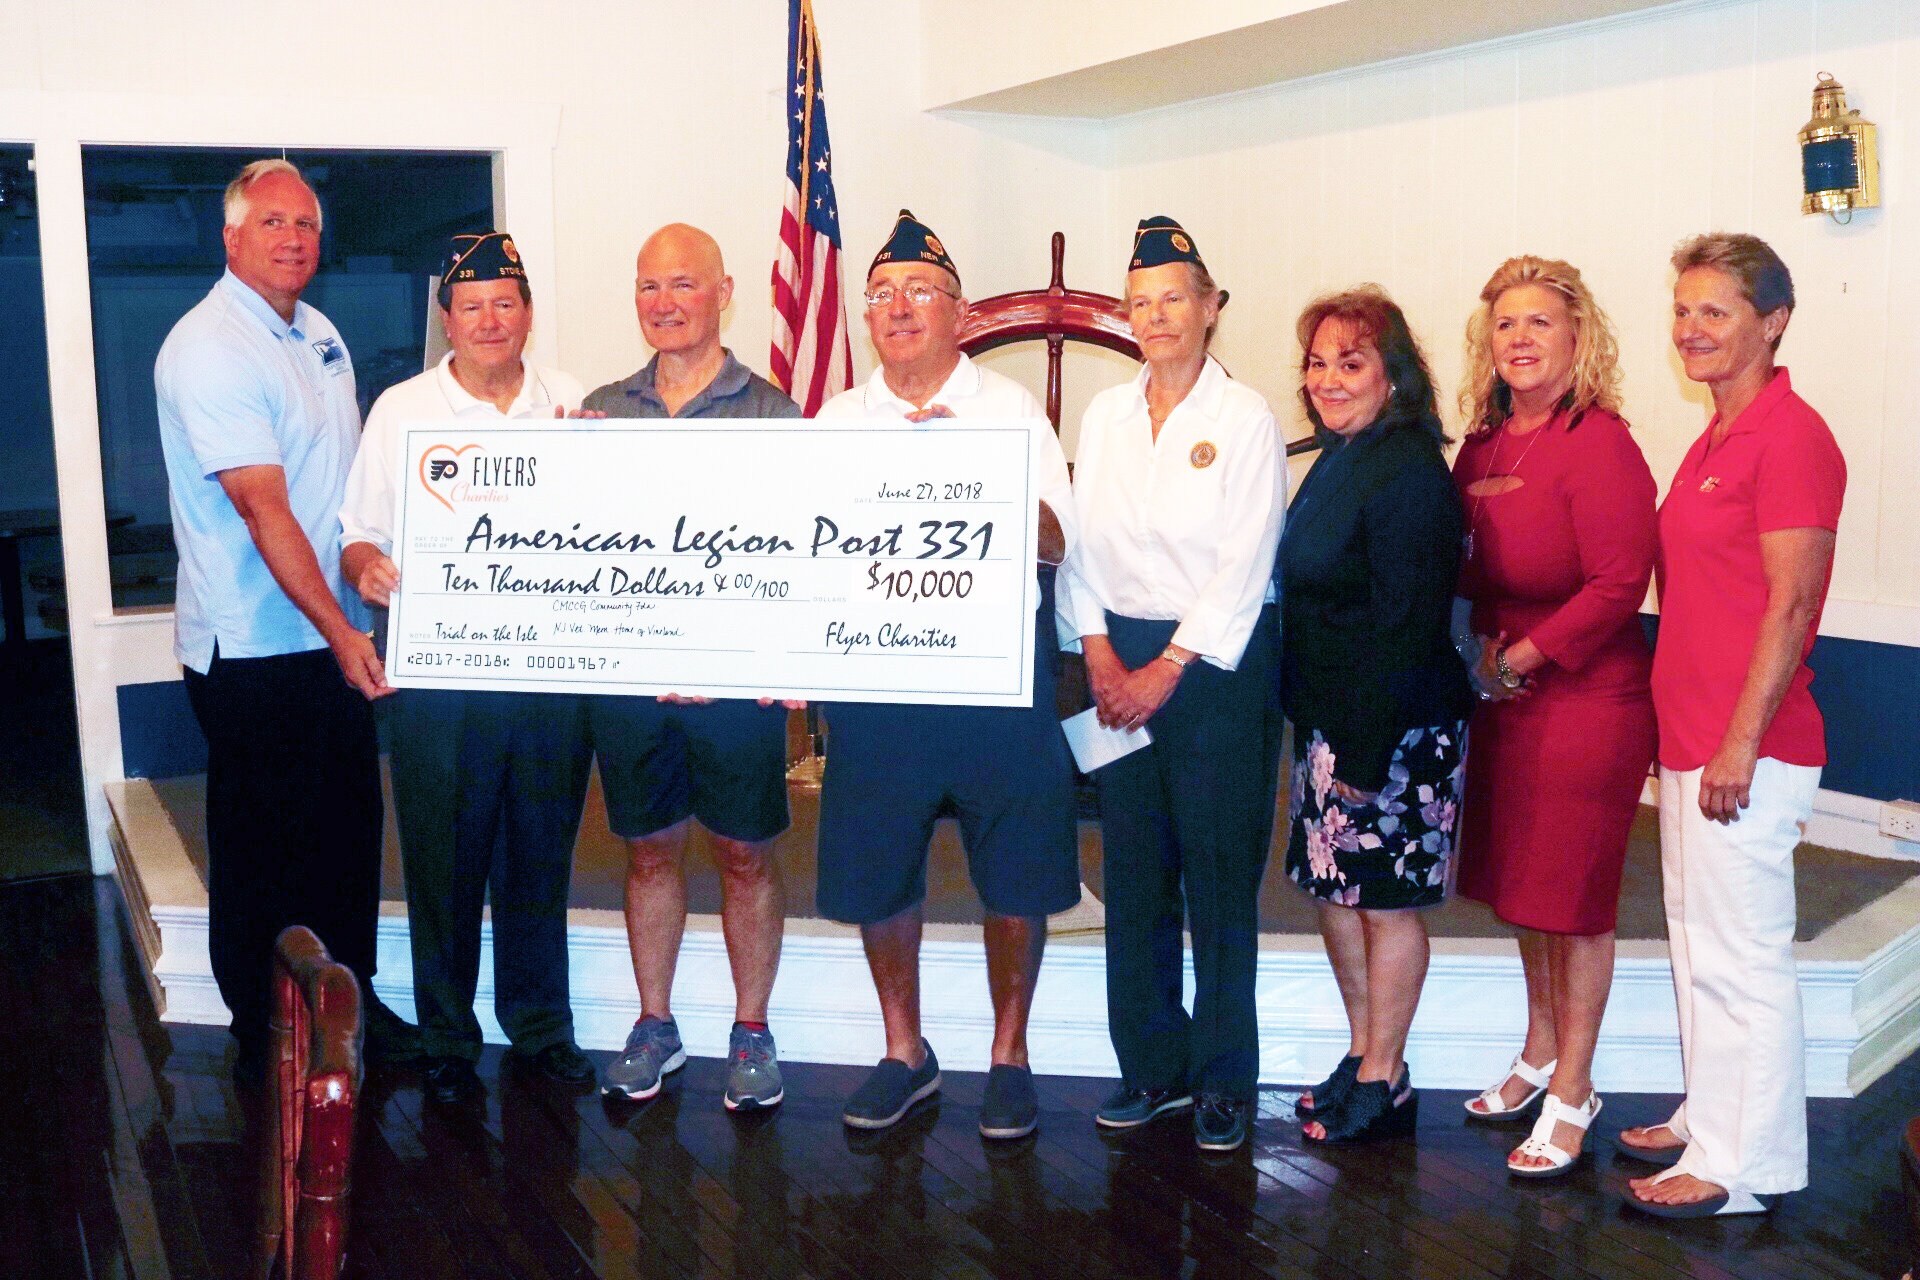  Posing with check from Flyers Charities (from left): Mike Couch (Coast Guard Community Foundation), Jon Ready (Post 331 trustee),   Jim McCrossin (Flyers trainer), Tom McCullough (Post 331 commander), Martha Schulz (Post 331 adjutant), Lisa Williams